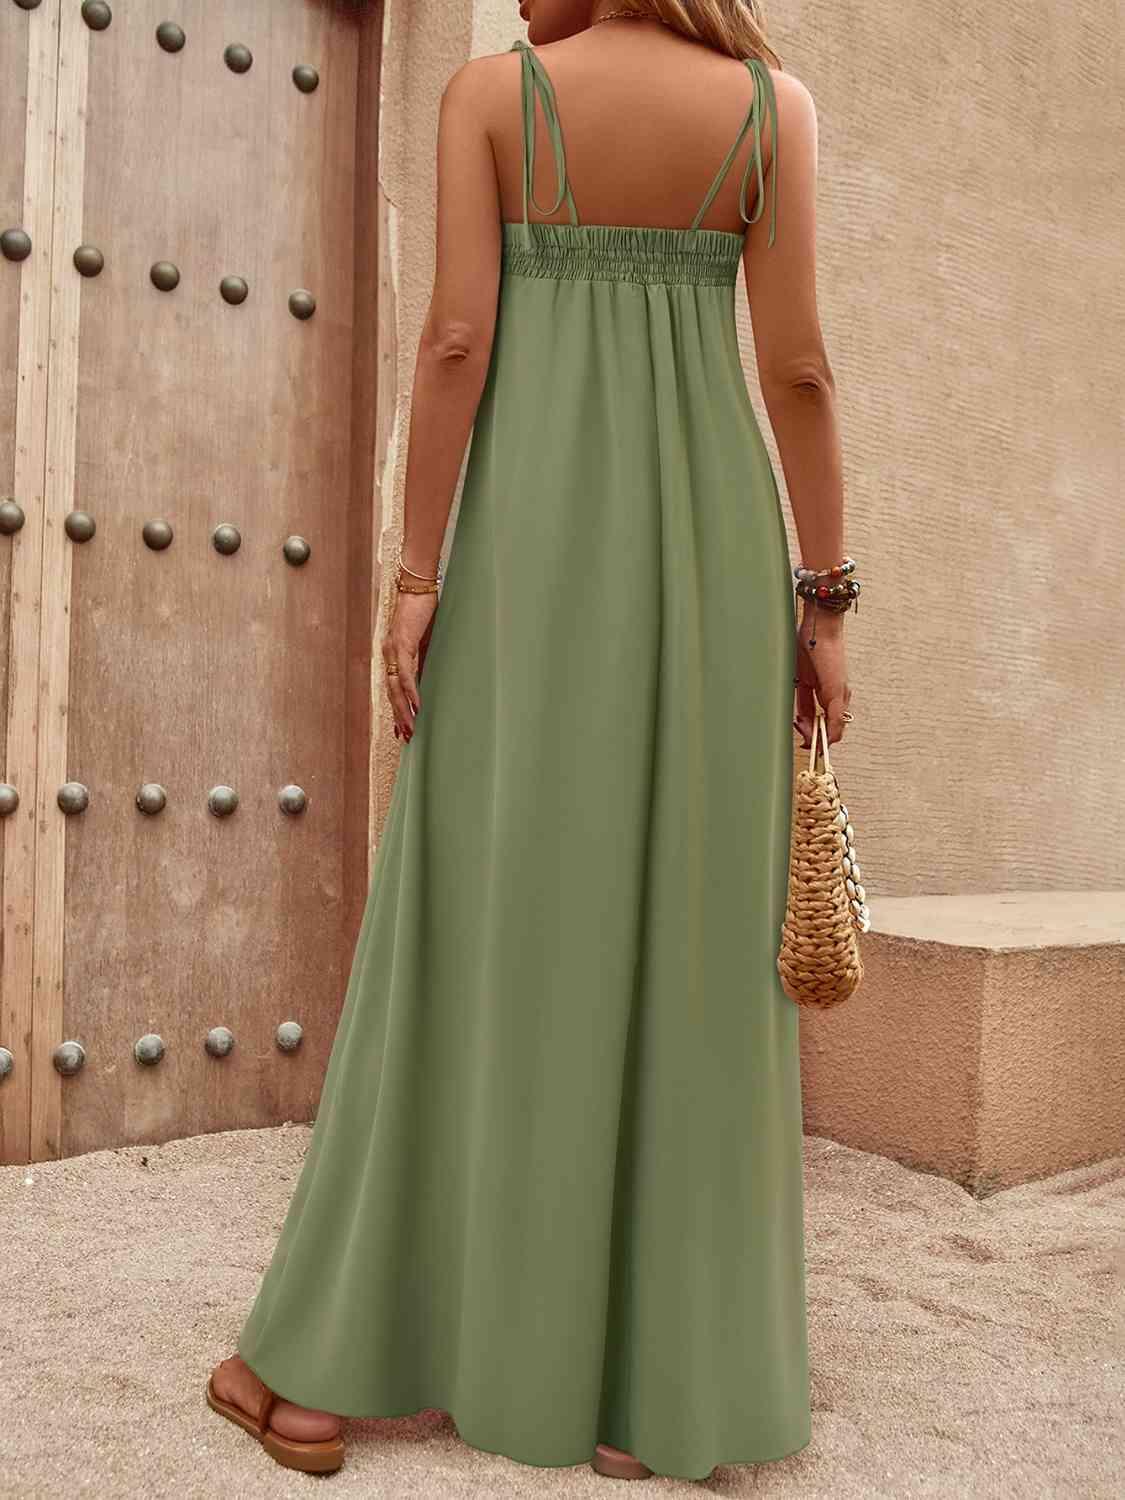 a woman in a long green dress standing in front of a door